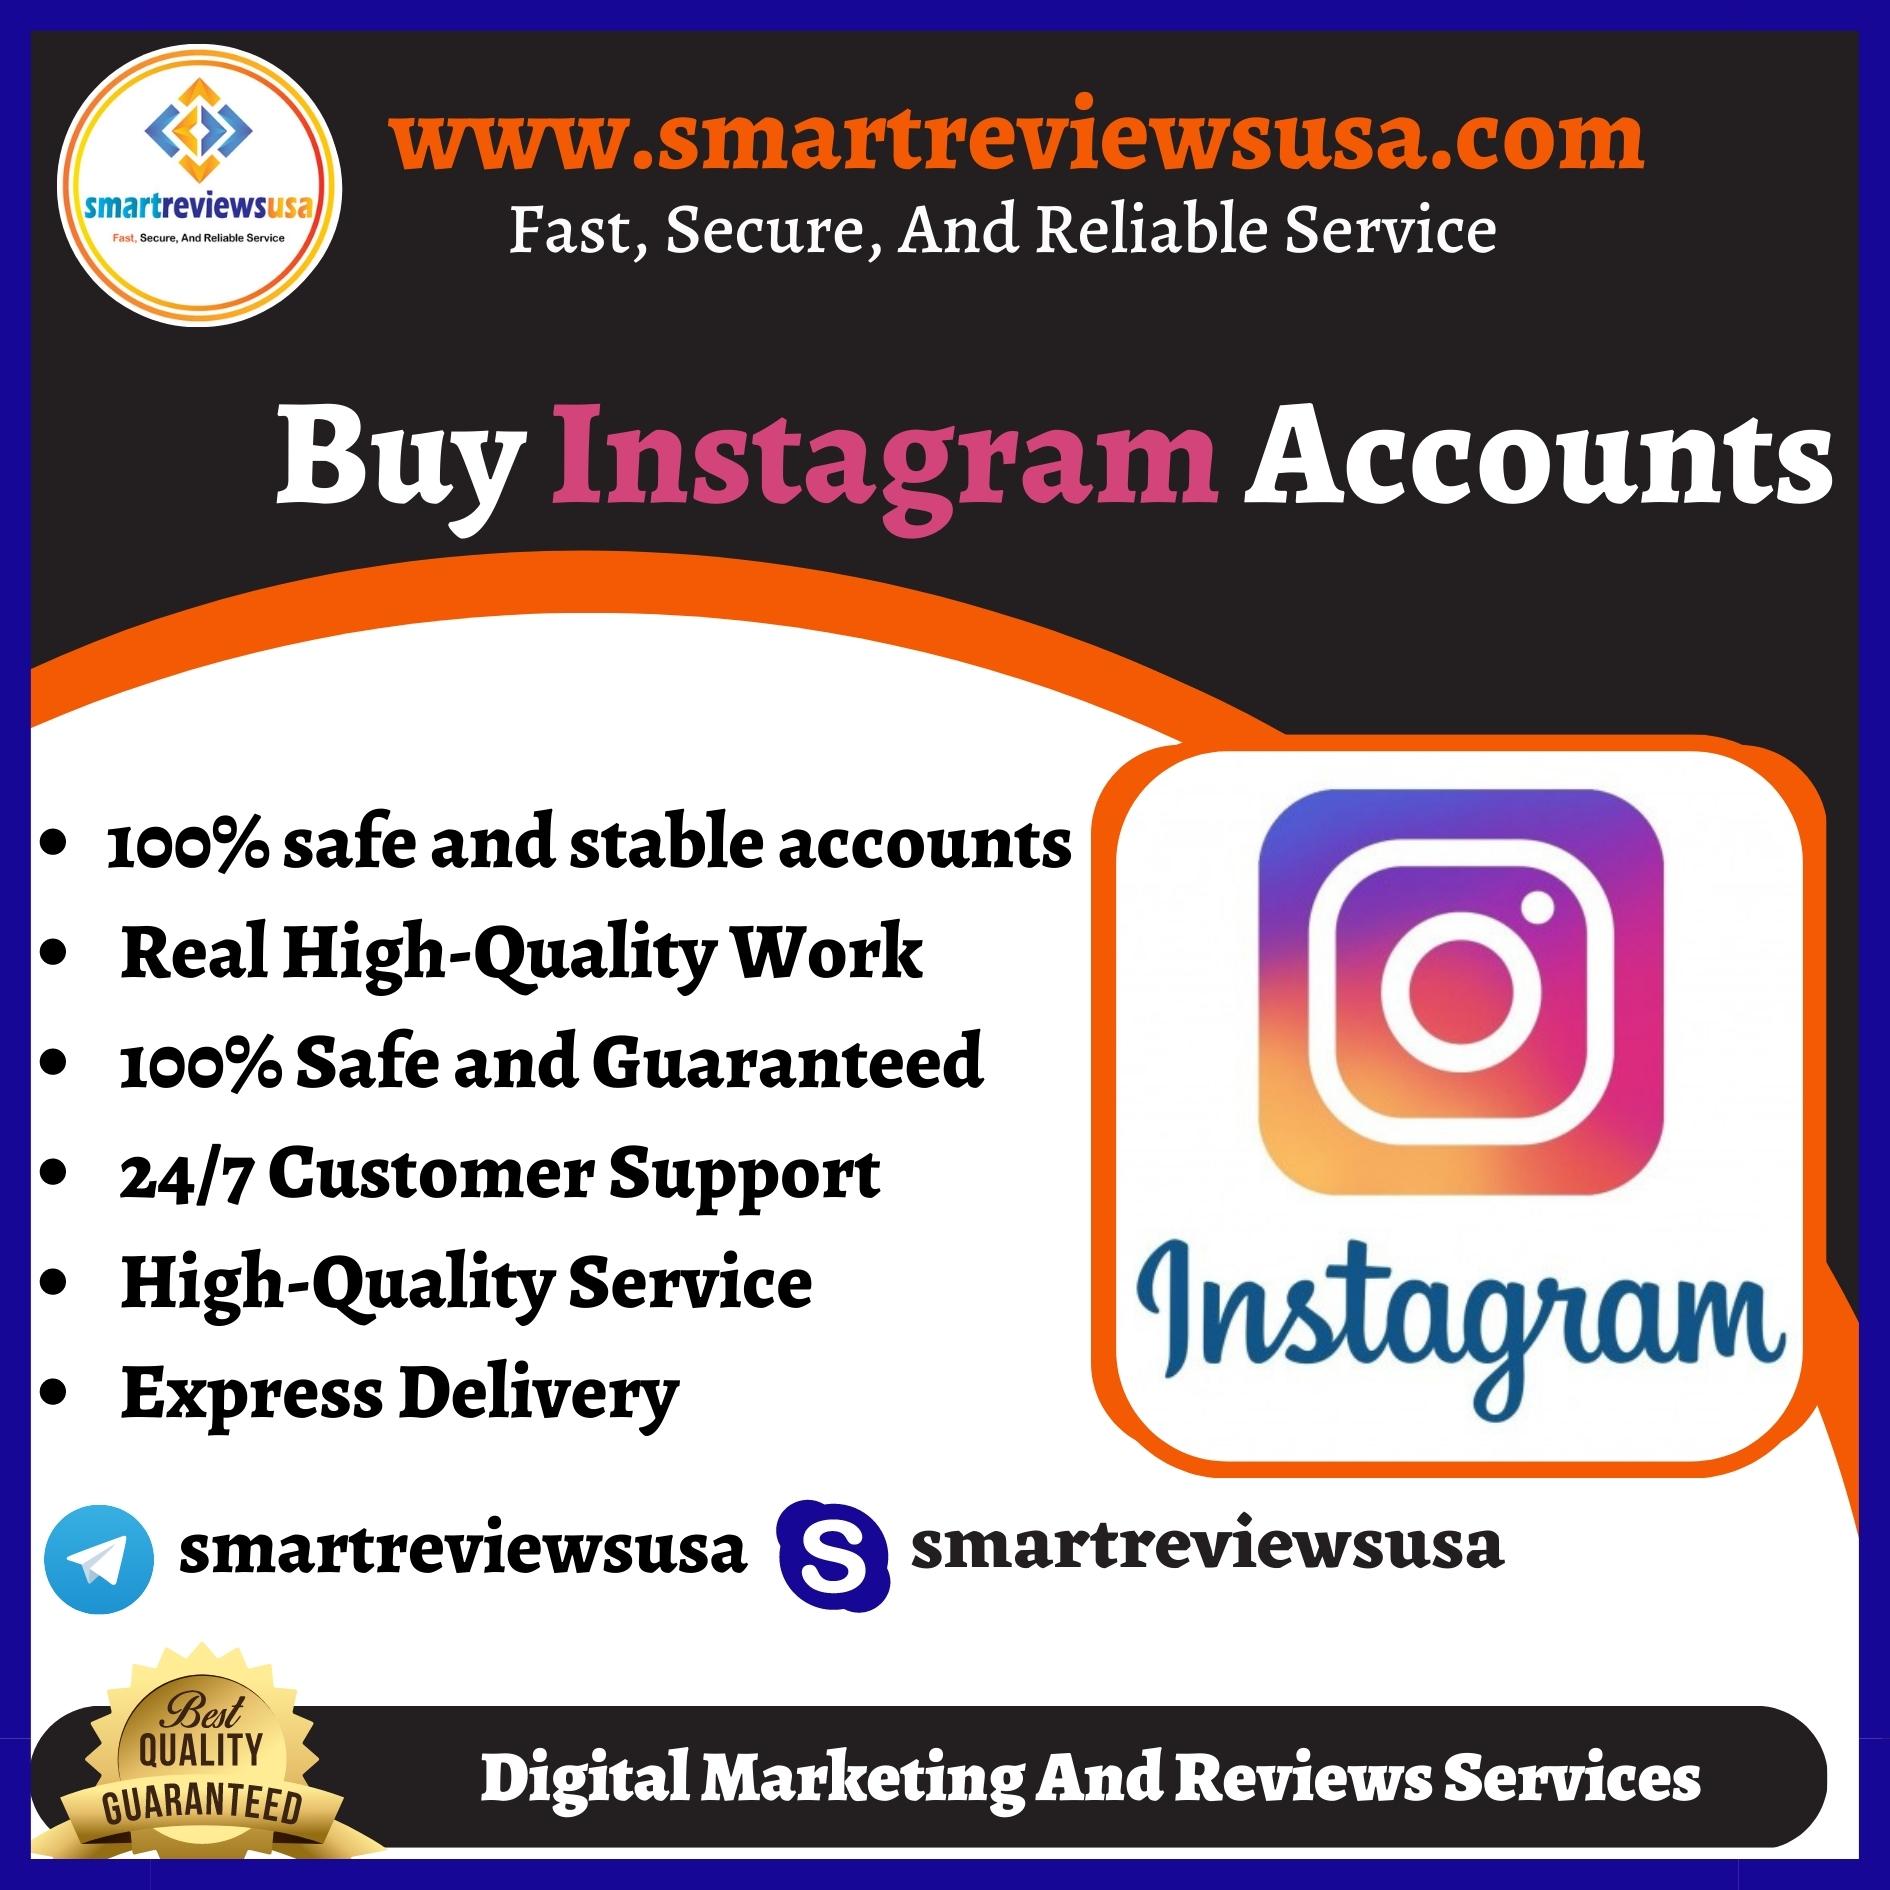 Buy Instagram Accounts | 100% Verified, Safe, Aged Accounts